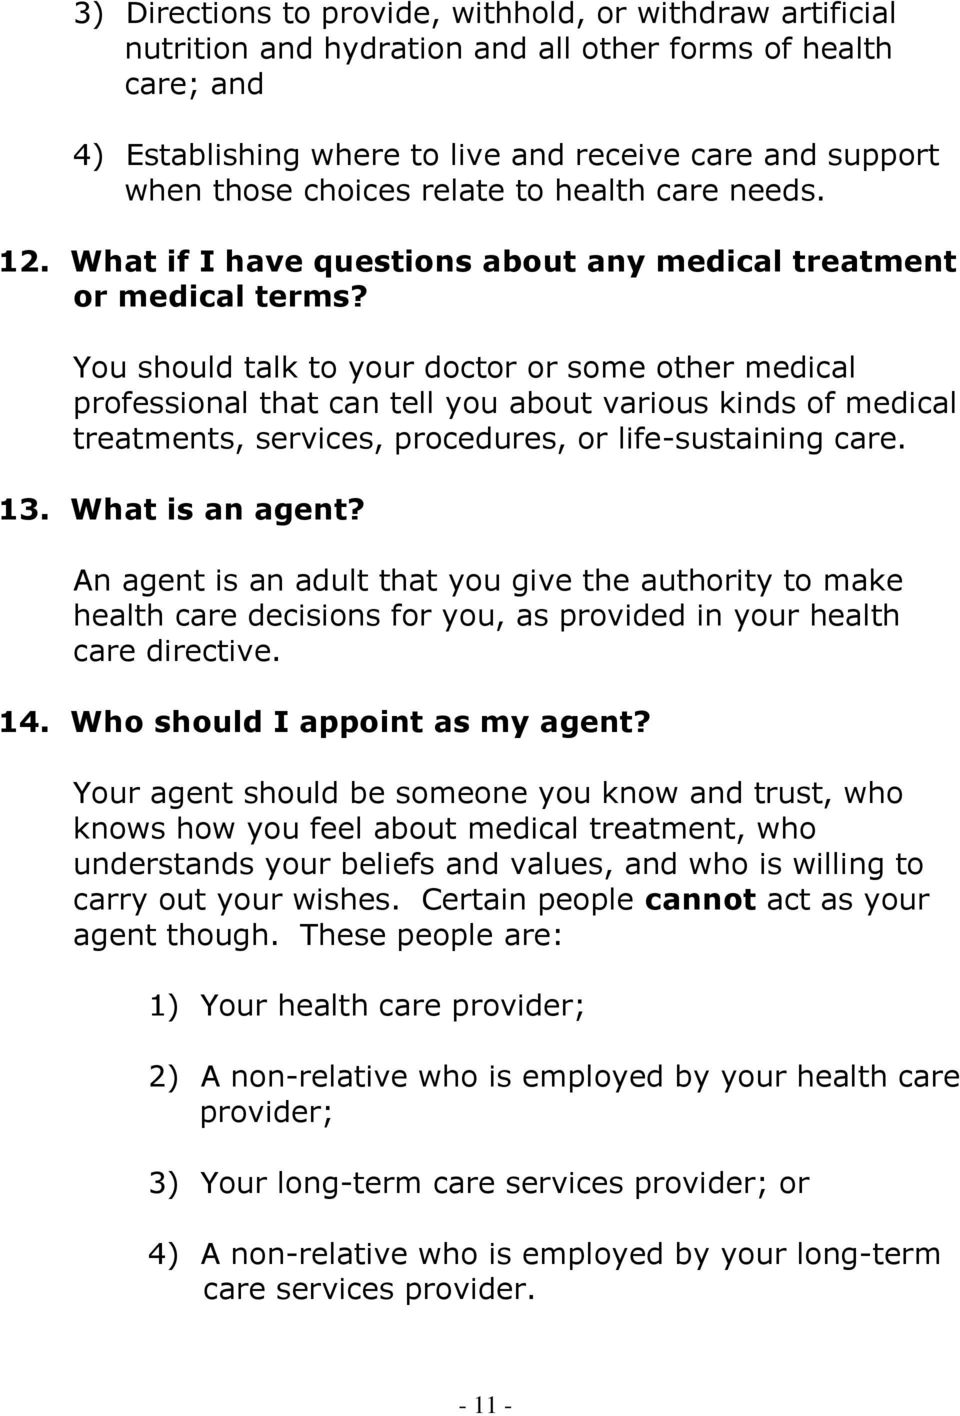 You should talk to your doctor or some other medical professional that can tell you about various kinds of medical treatments, services, procedures, or life-sustaining care. 13. What is an agent?